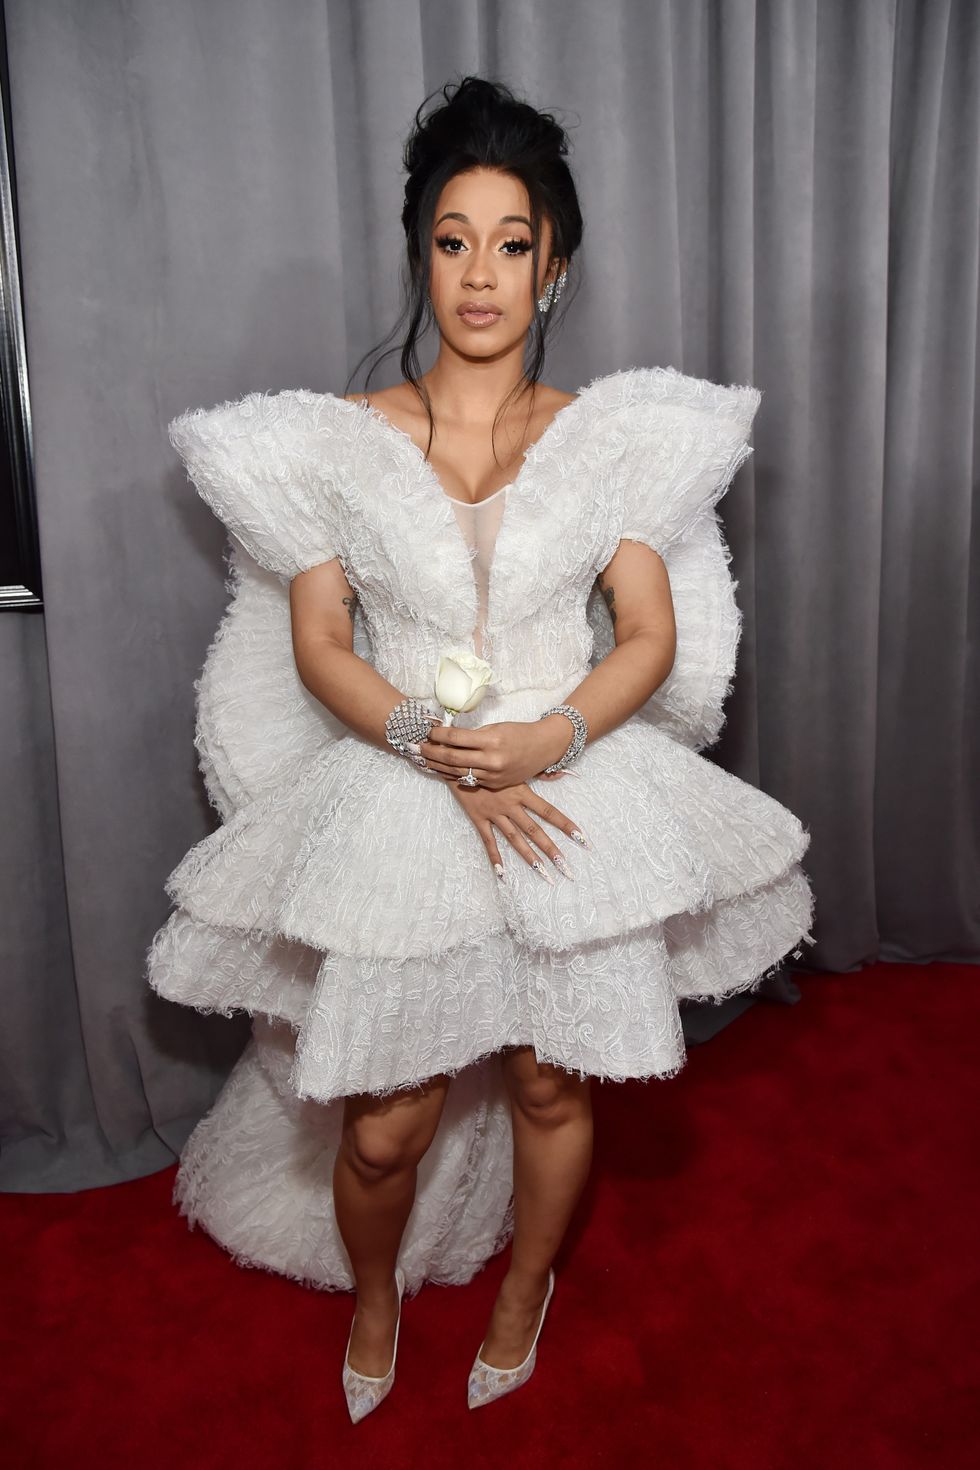 Cardi B Goes Glam in White for Grammys 2018: Photo 4022779